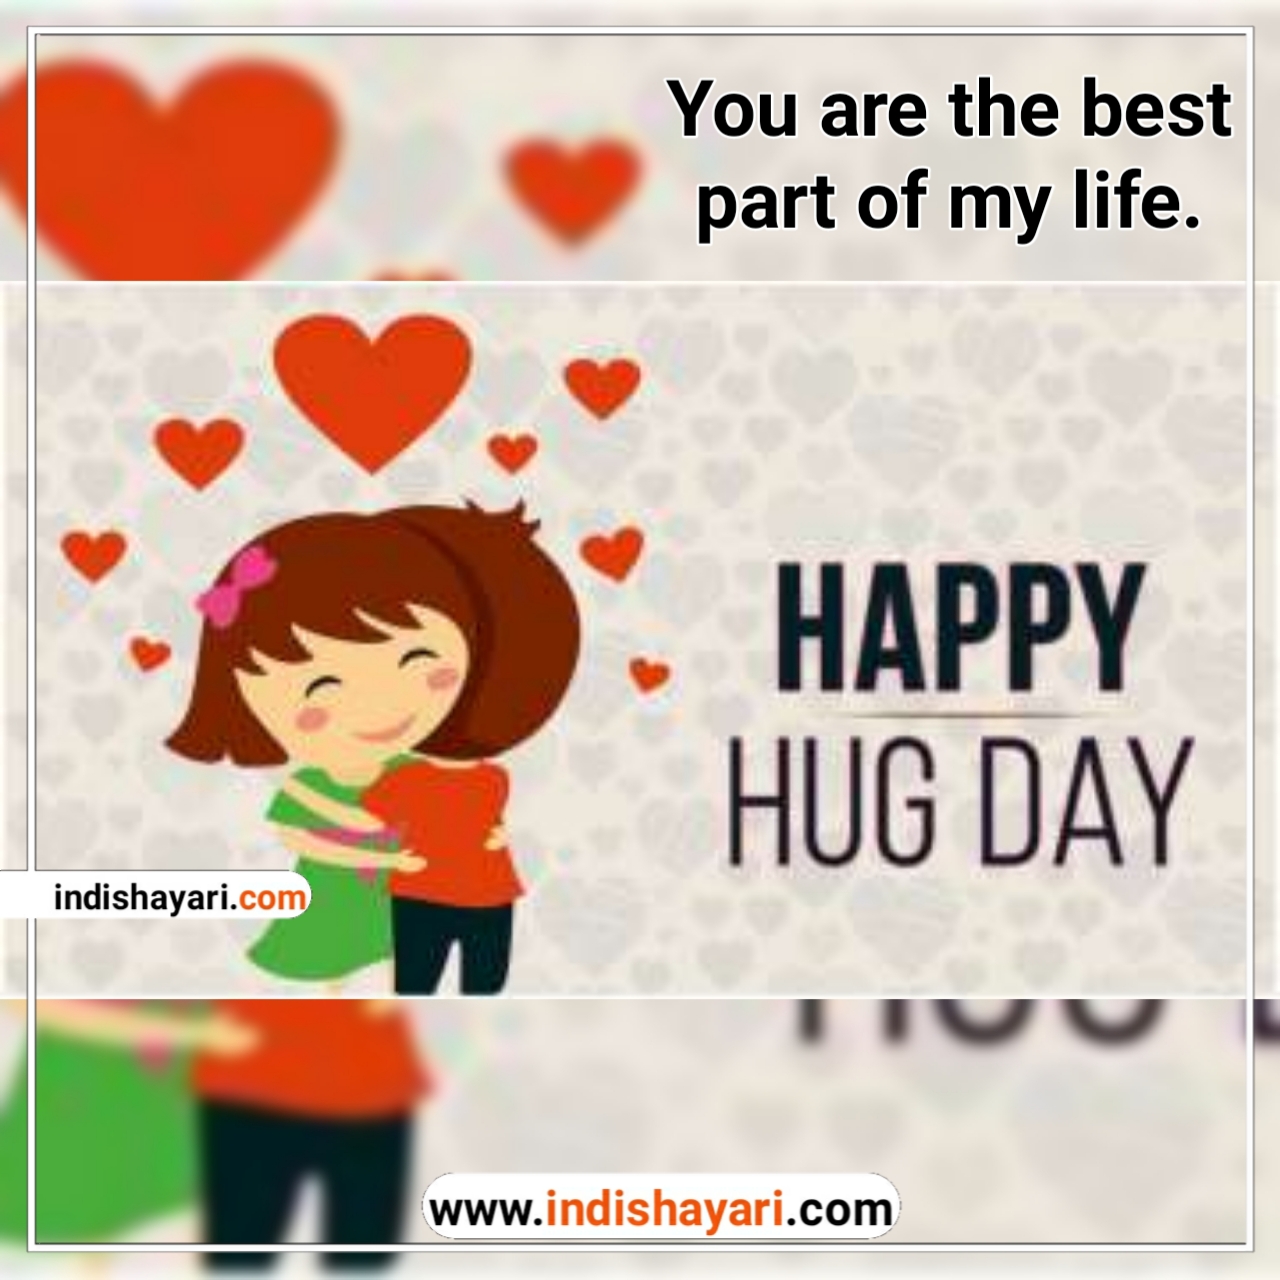 Happy Hug Day Quotes whishes greetings sms  images for whatsapp Facebook Instagram status